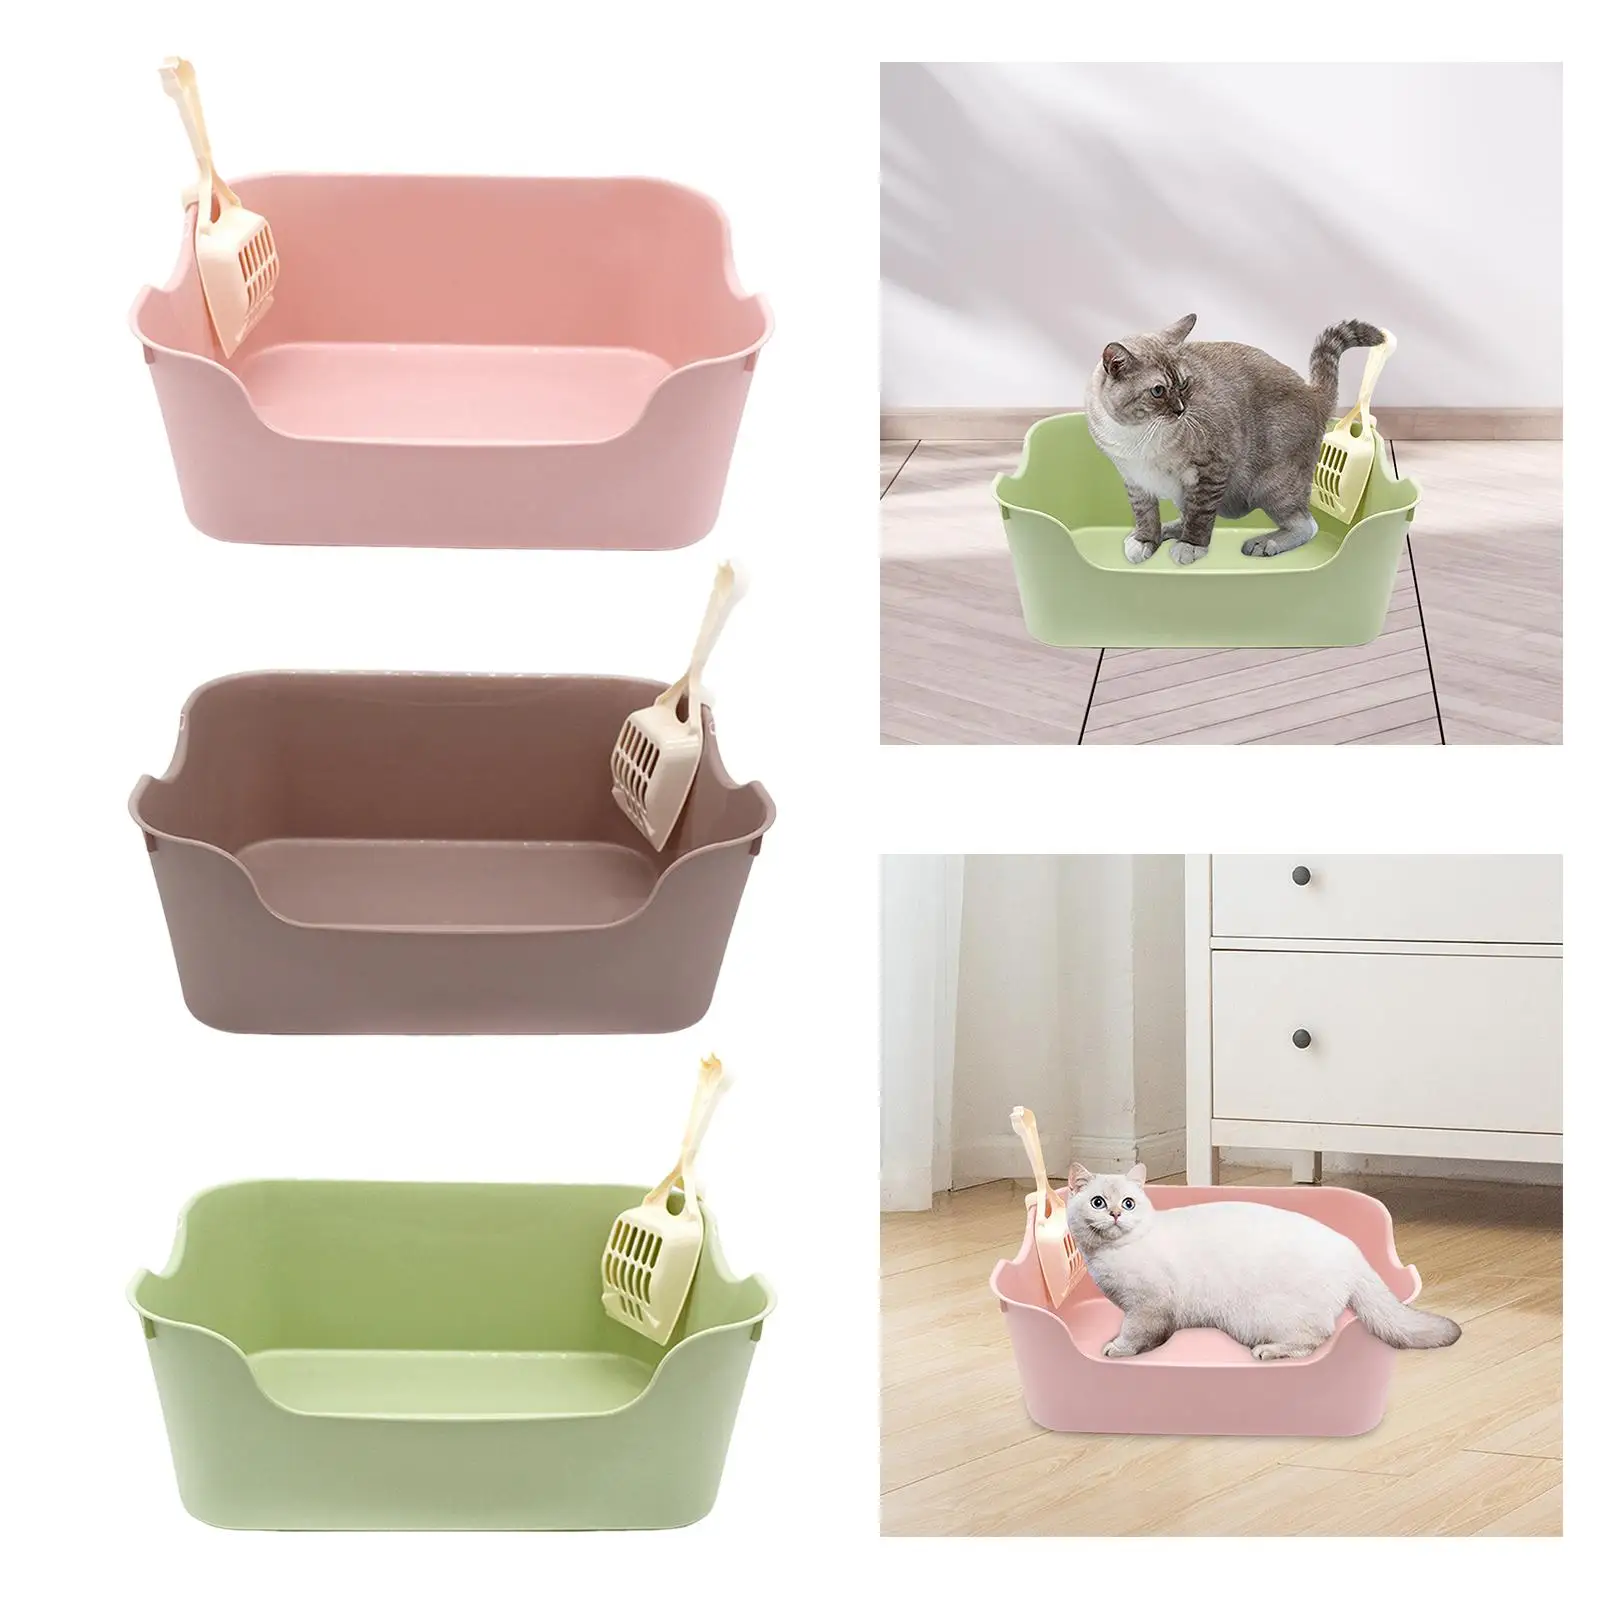 Cat Kitten Litter Pan Anti Splashing Easy to Clean Semi Closed with High Side for Small Pets Cat Potty Toilet Cat Sand Box